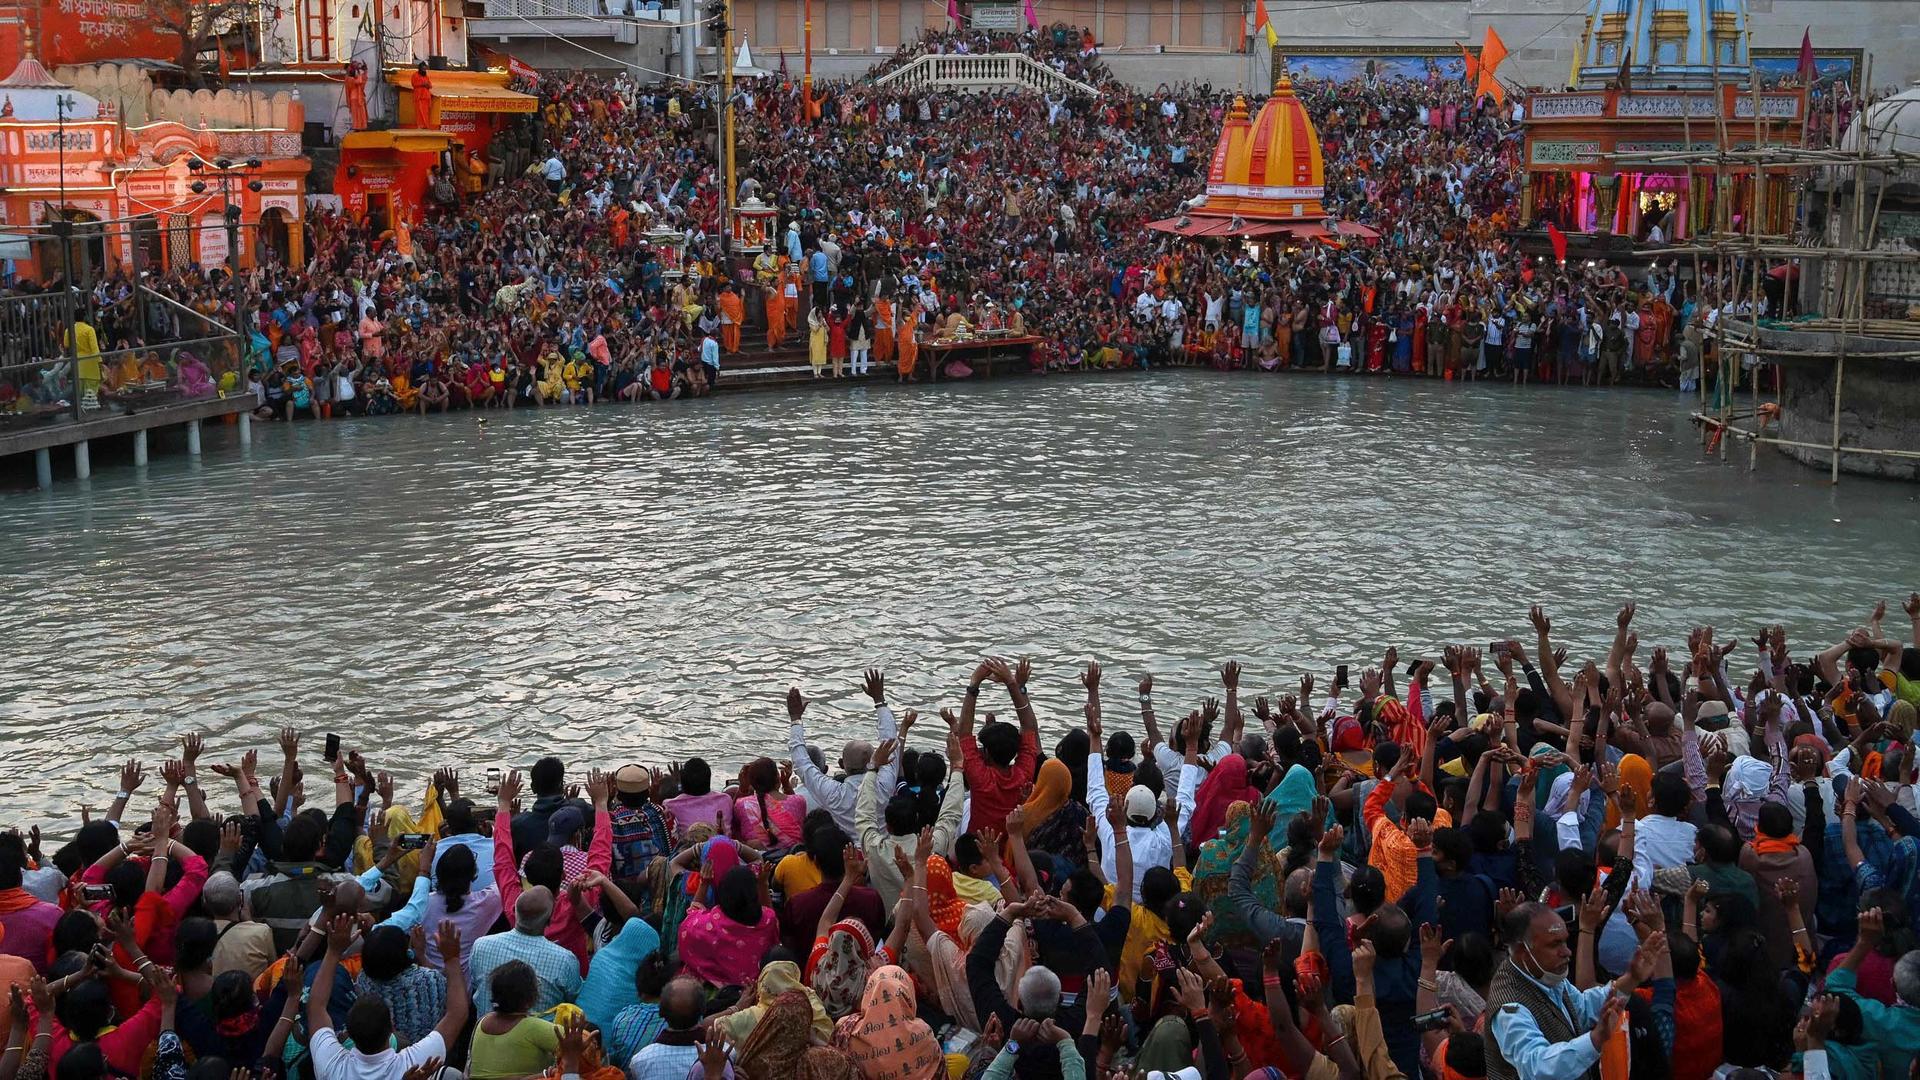 Large crowds of people surround river in India